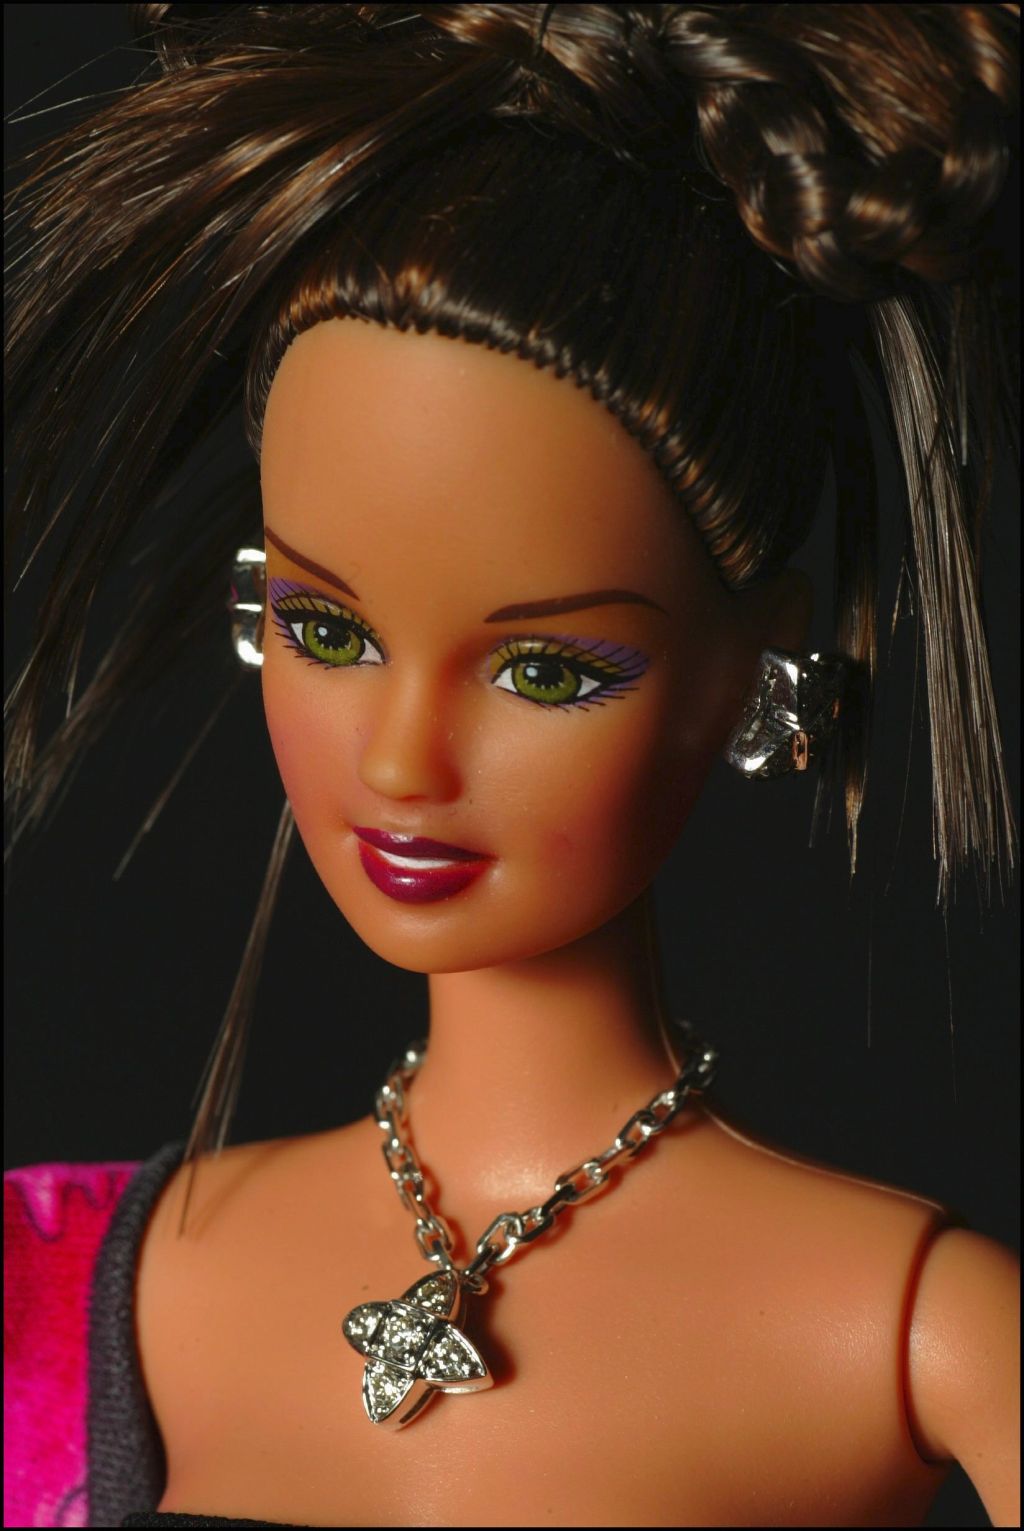 Barbie Jewelry 2003 Collection To Be Sold By Auction To Benefit The French Red-Cross. On December 11, 2003 In Paris, France